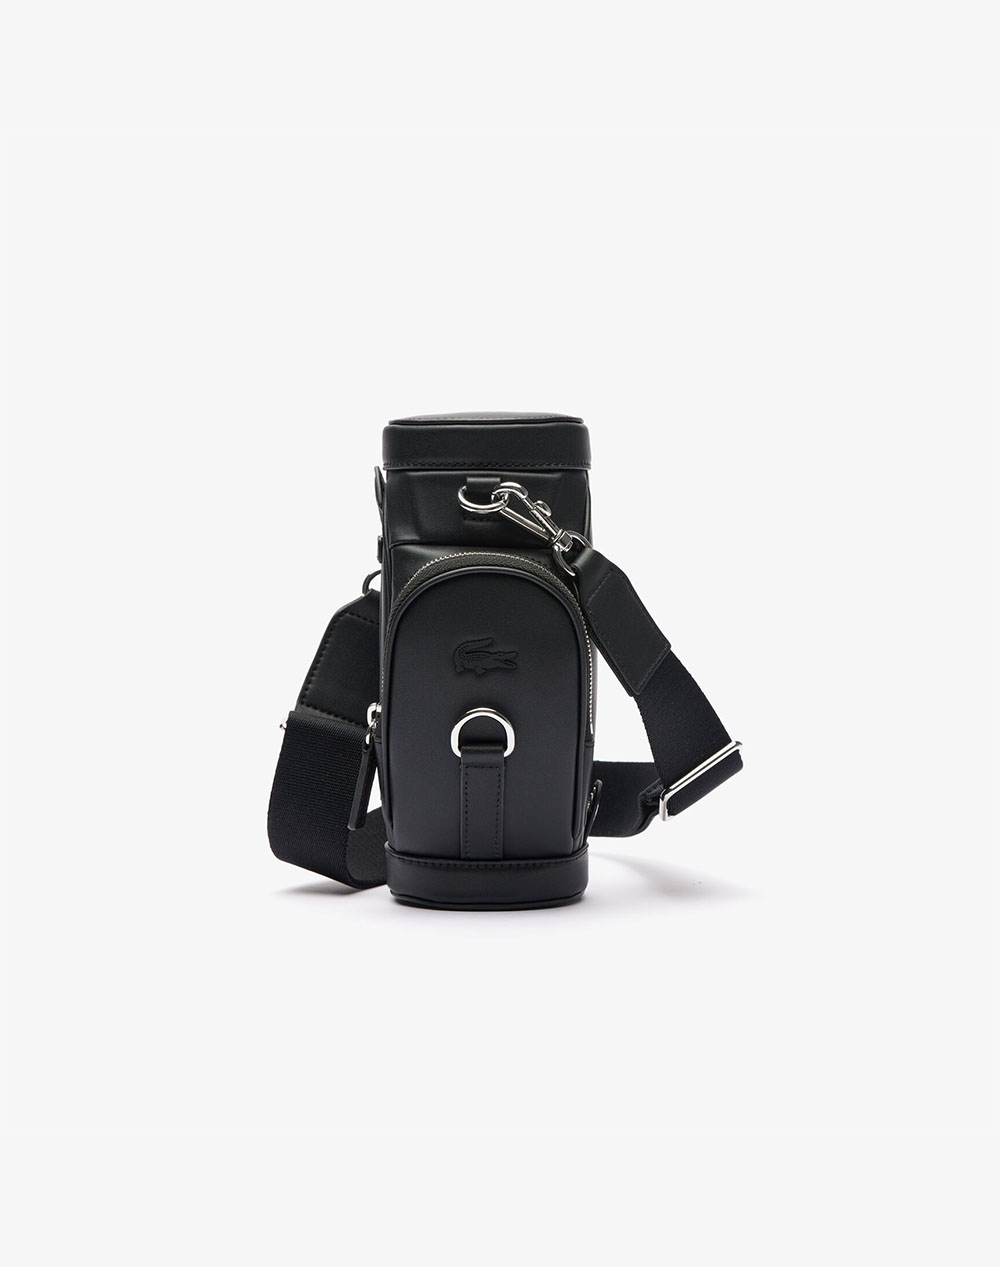 LACOSTE ΤΣΑΝΤΑ XS CROSSOVER BAG 3NF4616MD-000 Black